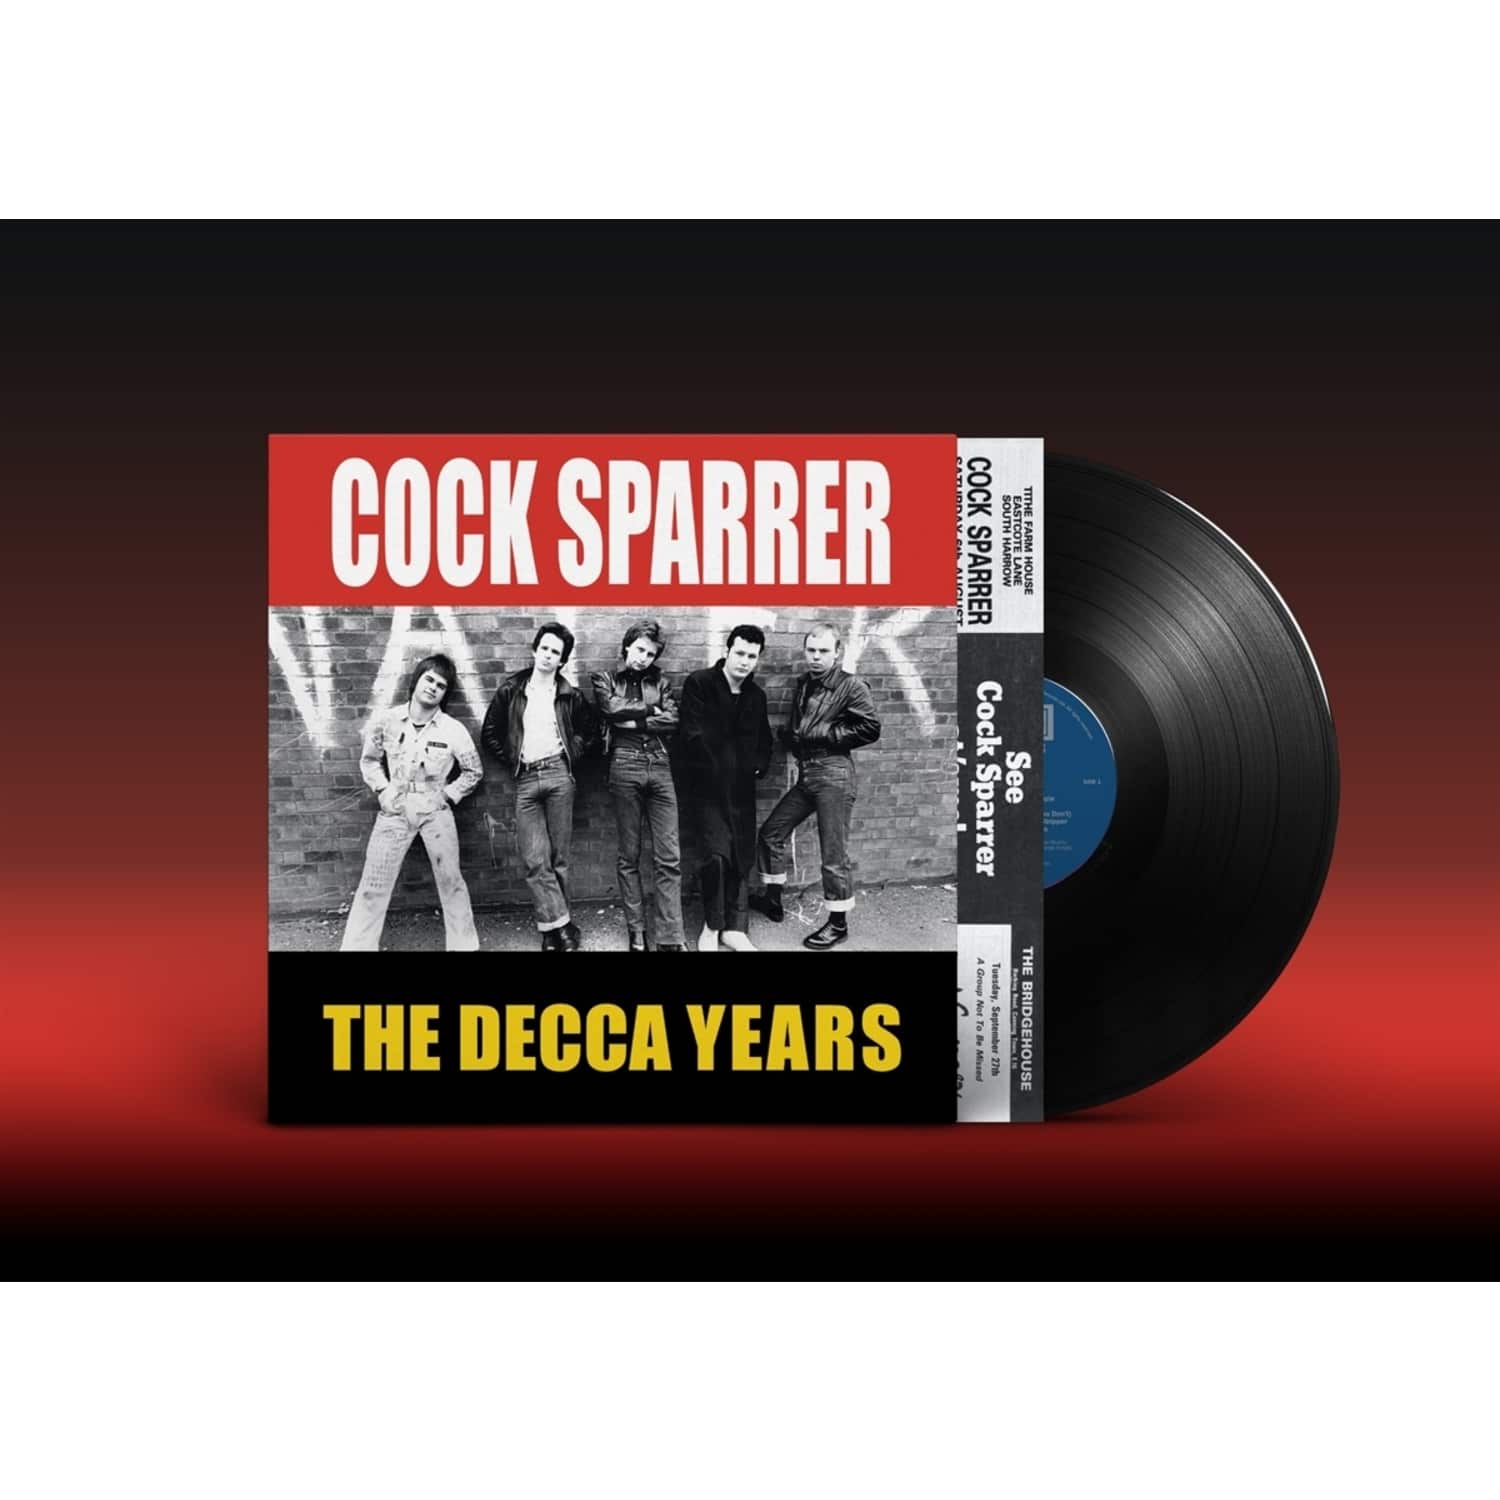 Cock Sparrer - THE DECCA YEARS-VINYL EDITION 